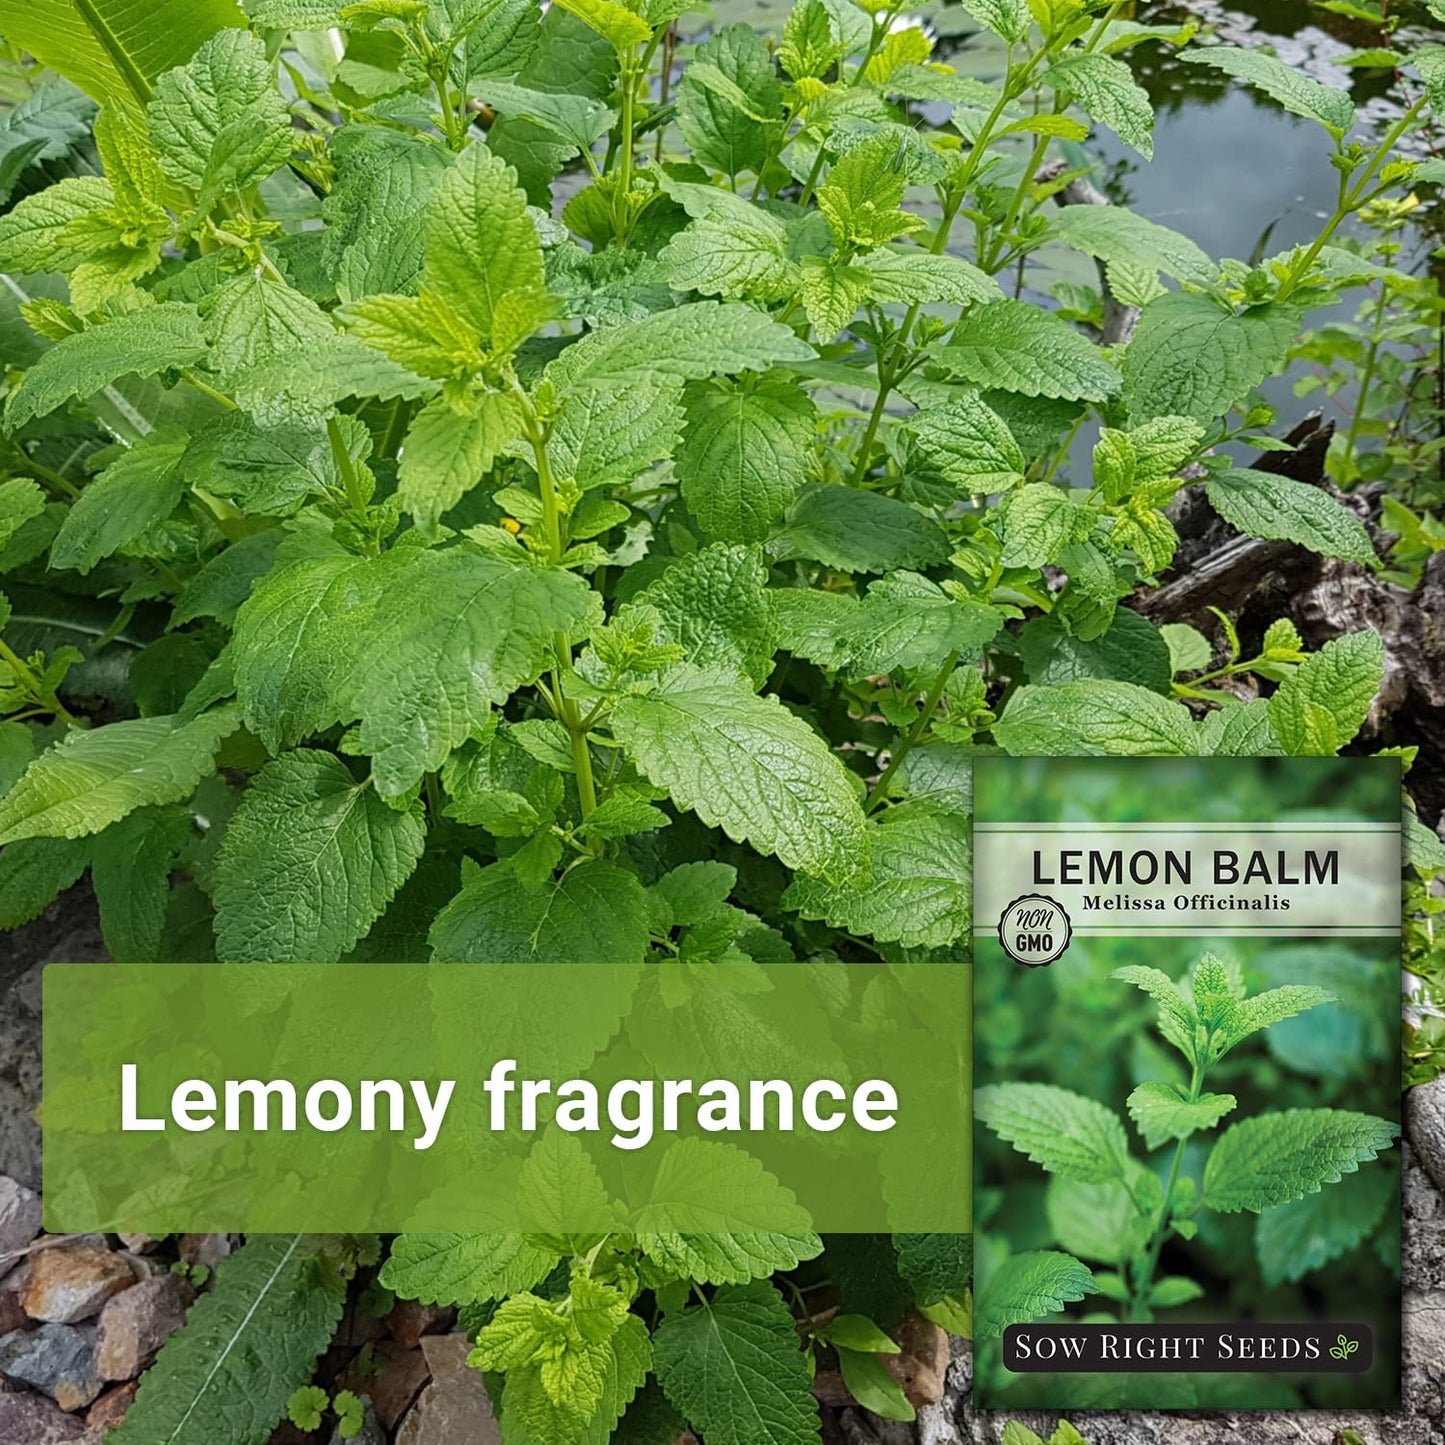 - Lemon Balm Seeds for Planting - Non-Gmo Heirloom Packet with Instructions - Easy to Grow Herb Garden - Aromatic Medicinal Herb and Great for Herbal Teas - Perennial Mint Relative